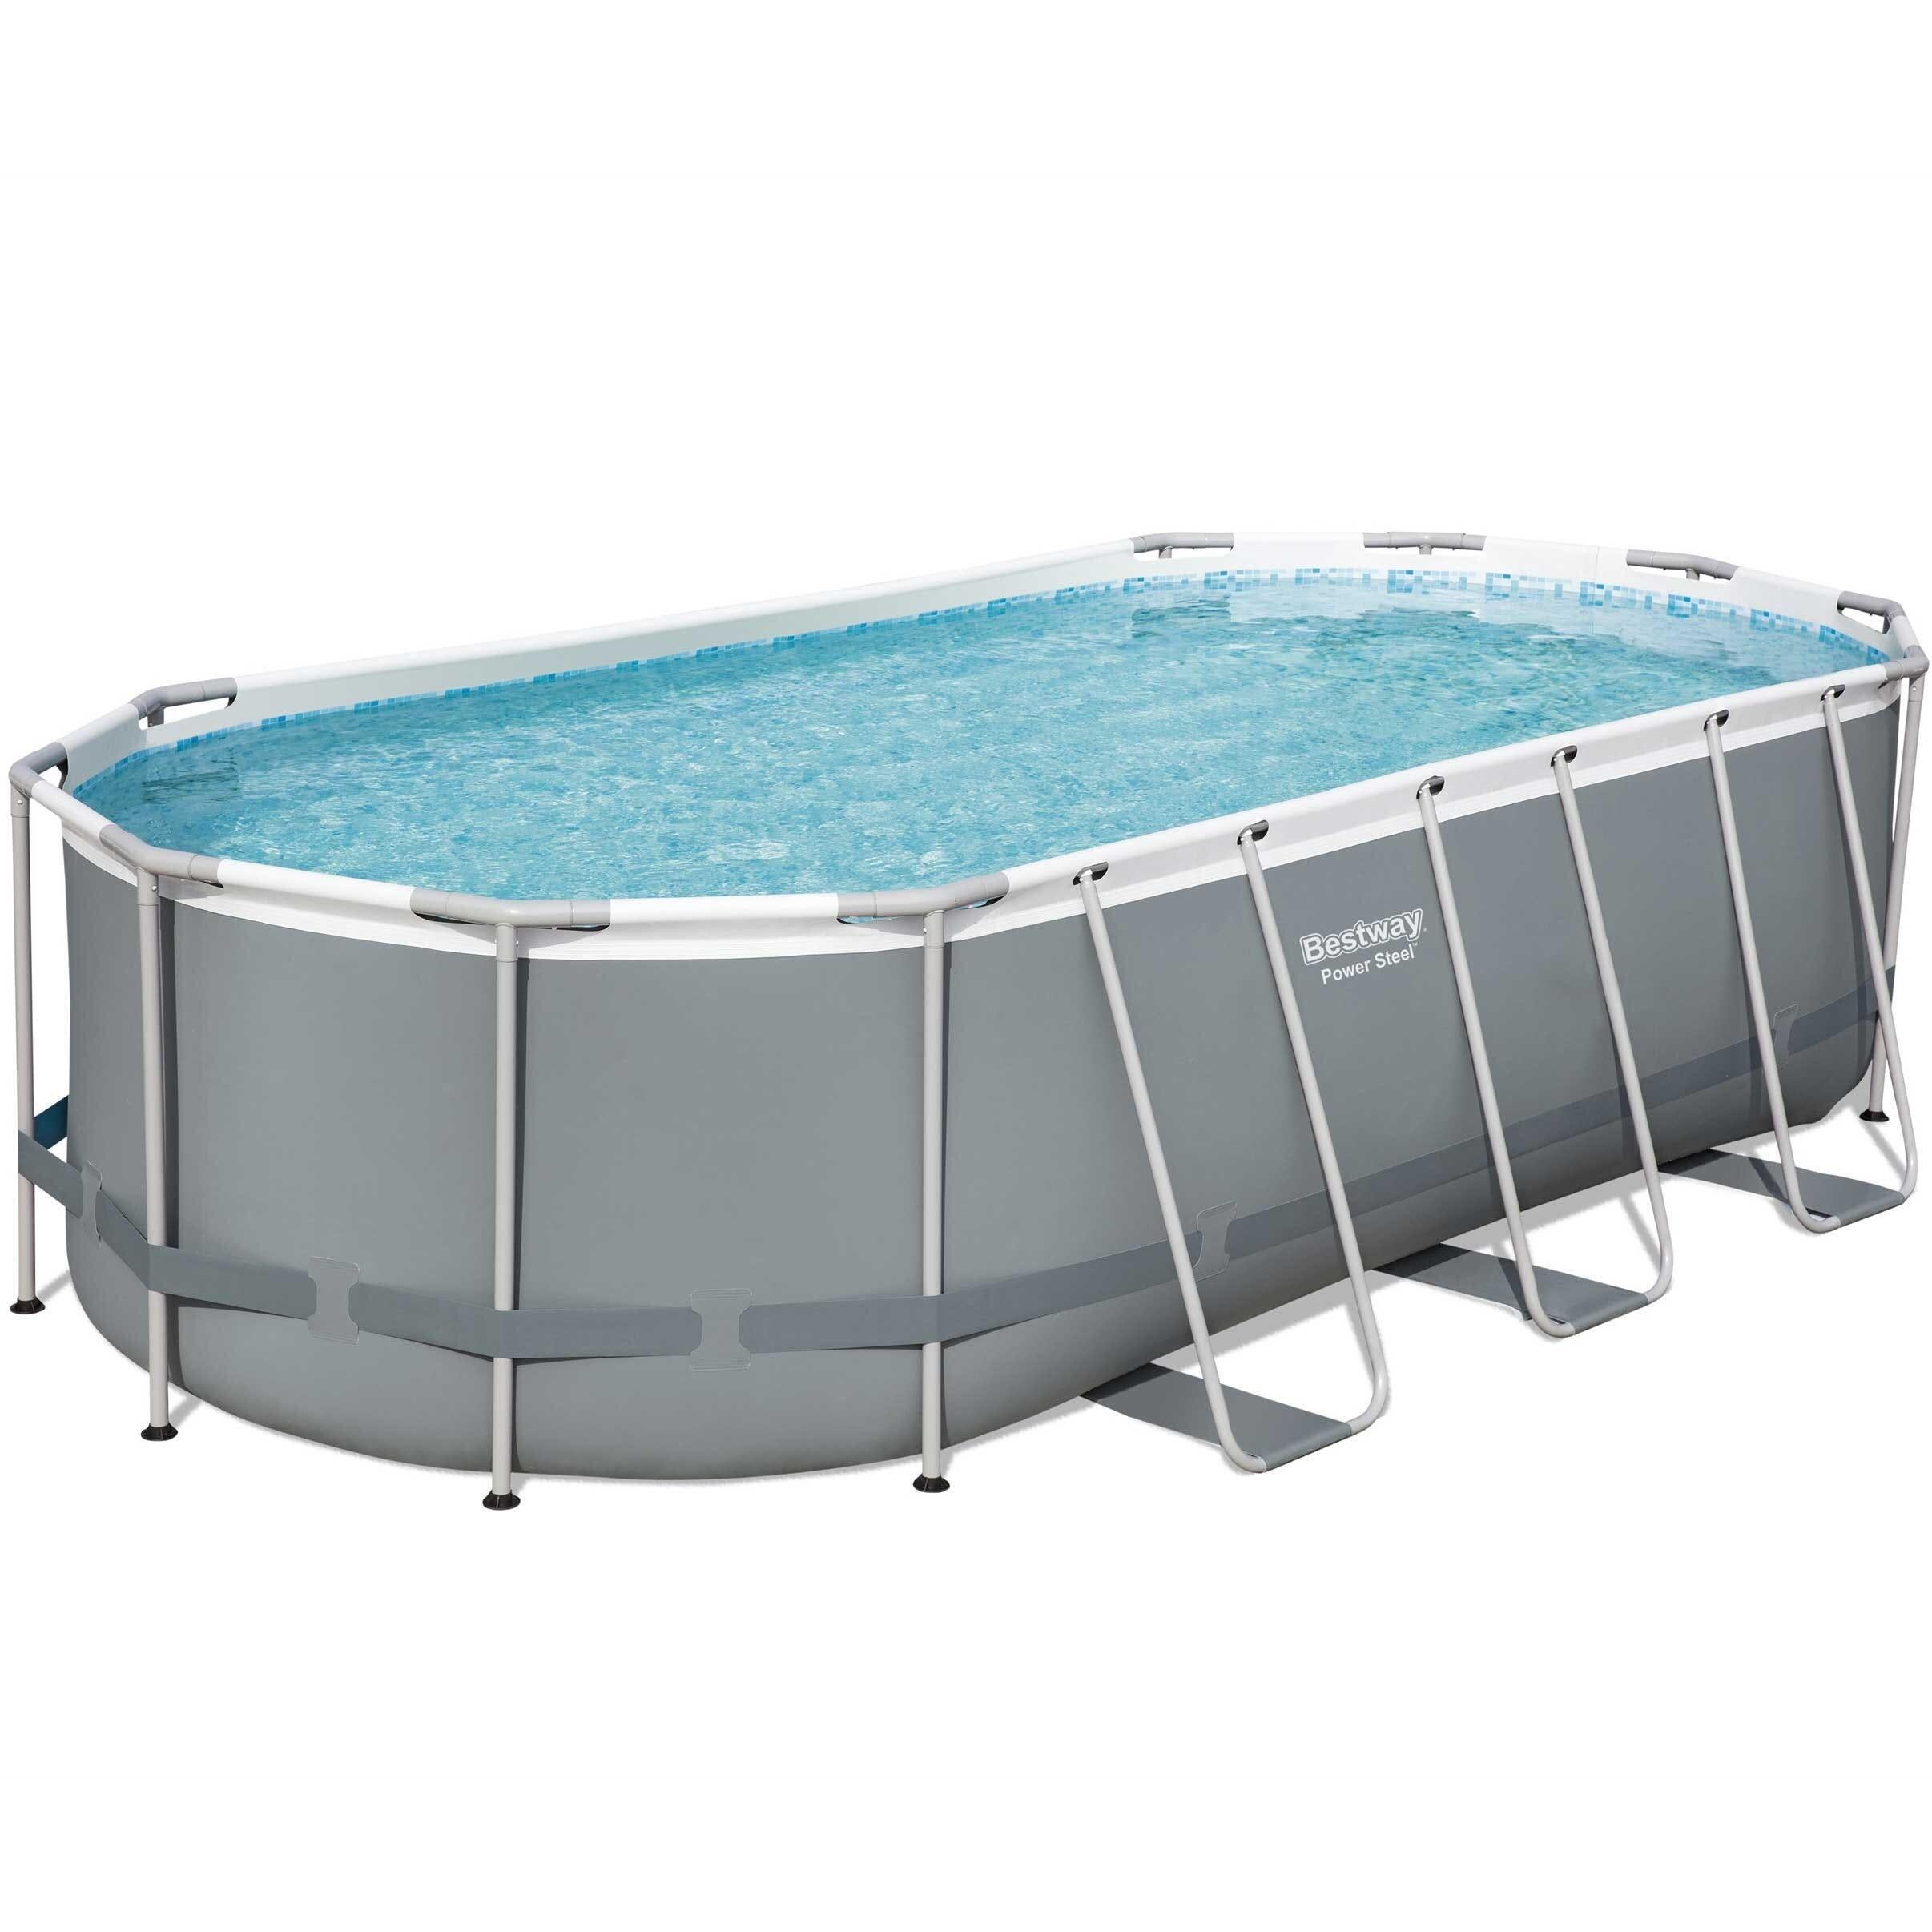 Bestway 18ft x 9ft x 48" Oval Power Steel Above Ground Swimming Pool 1/6